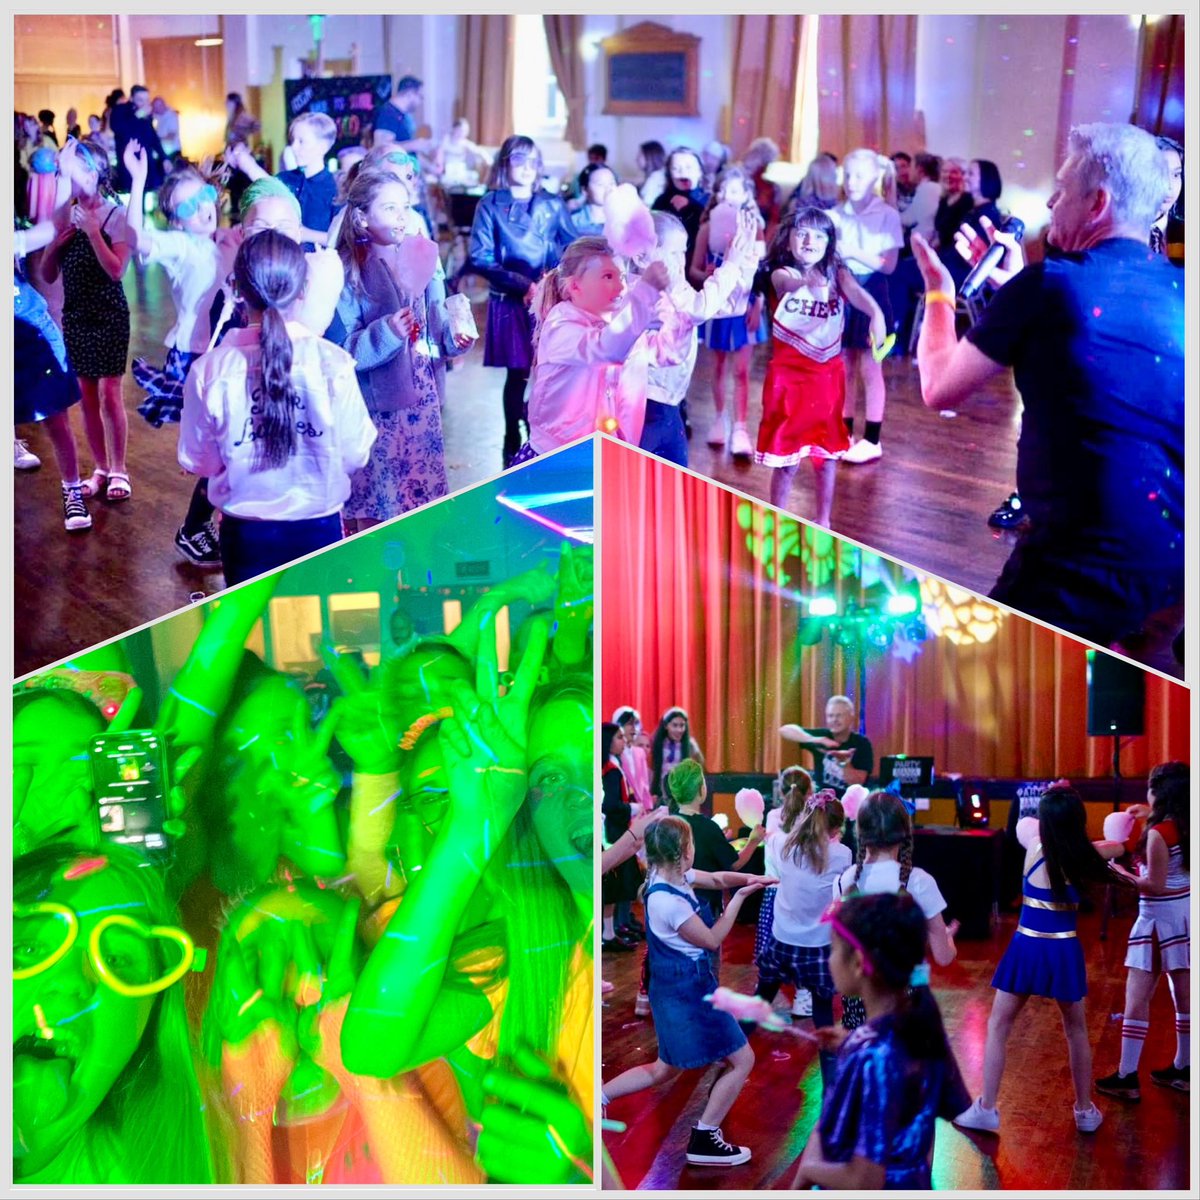 SCHOOLS!!
Certain dates in the school year are very popular so book now to get your preferred date. Message or call 07713 160803 , email andrew@partymania-dj.com.  #schooldisco #schooldj #promdisco #promdj